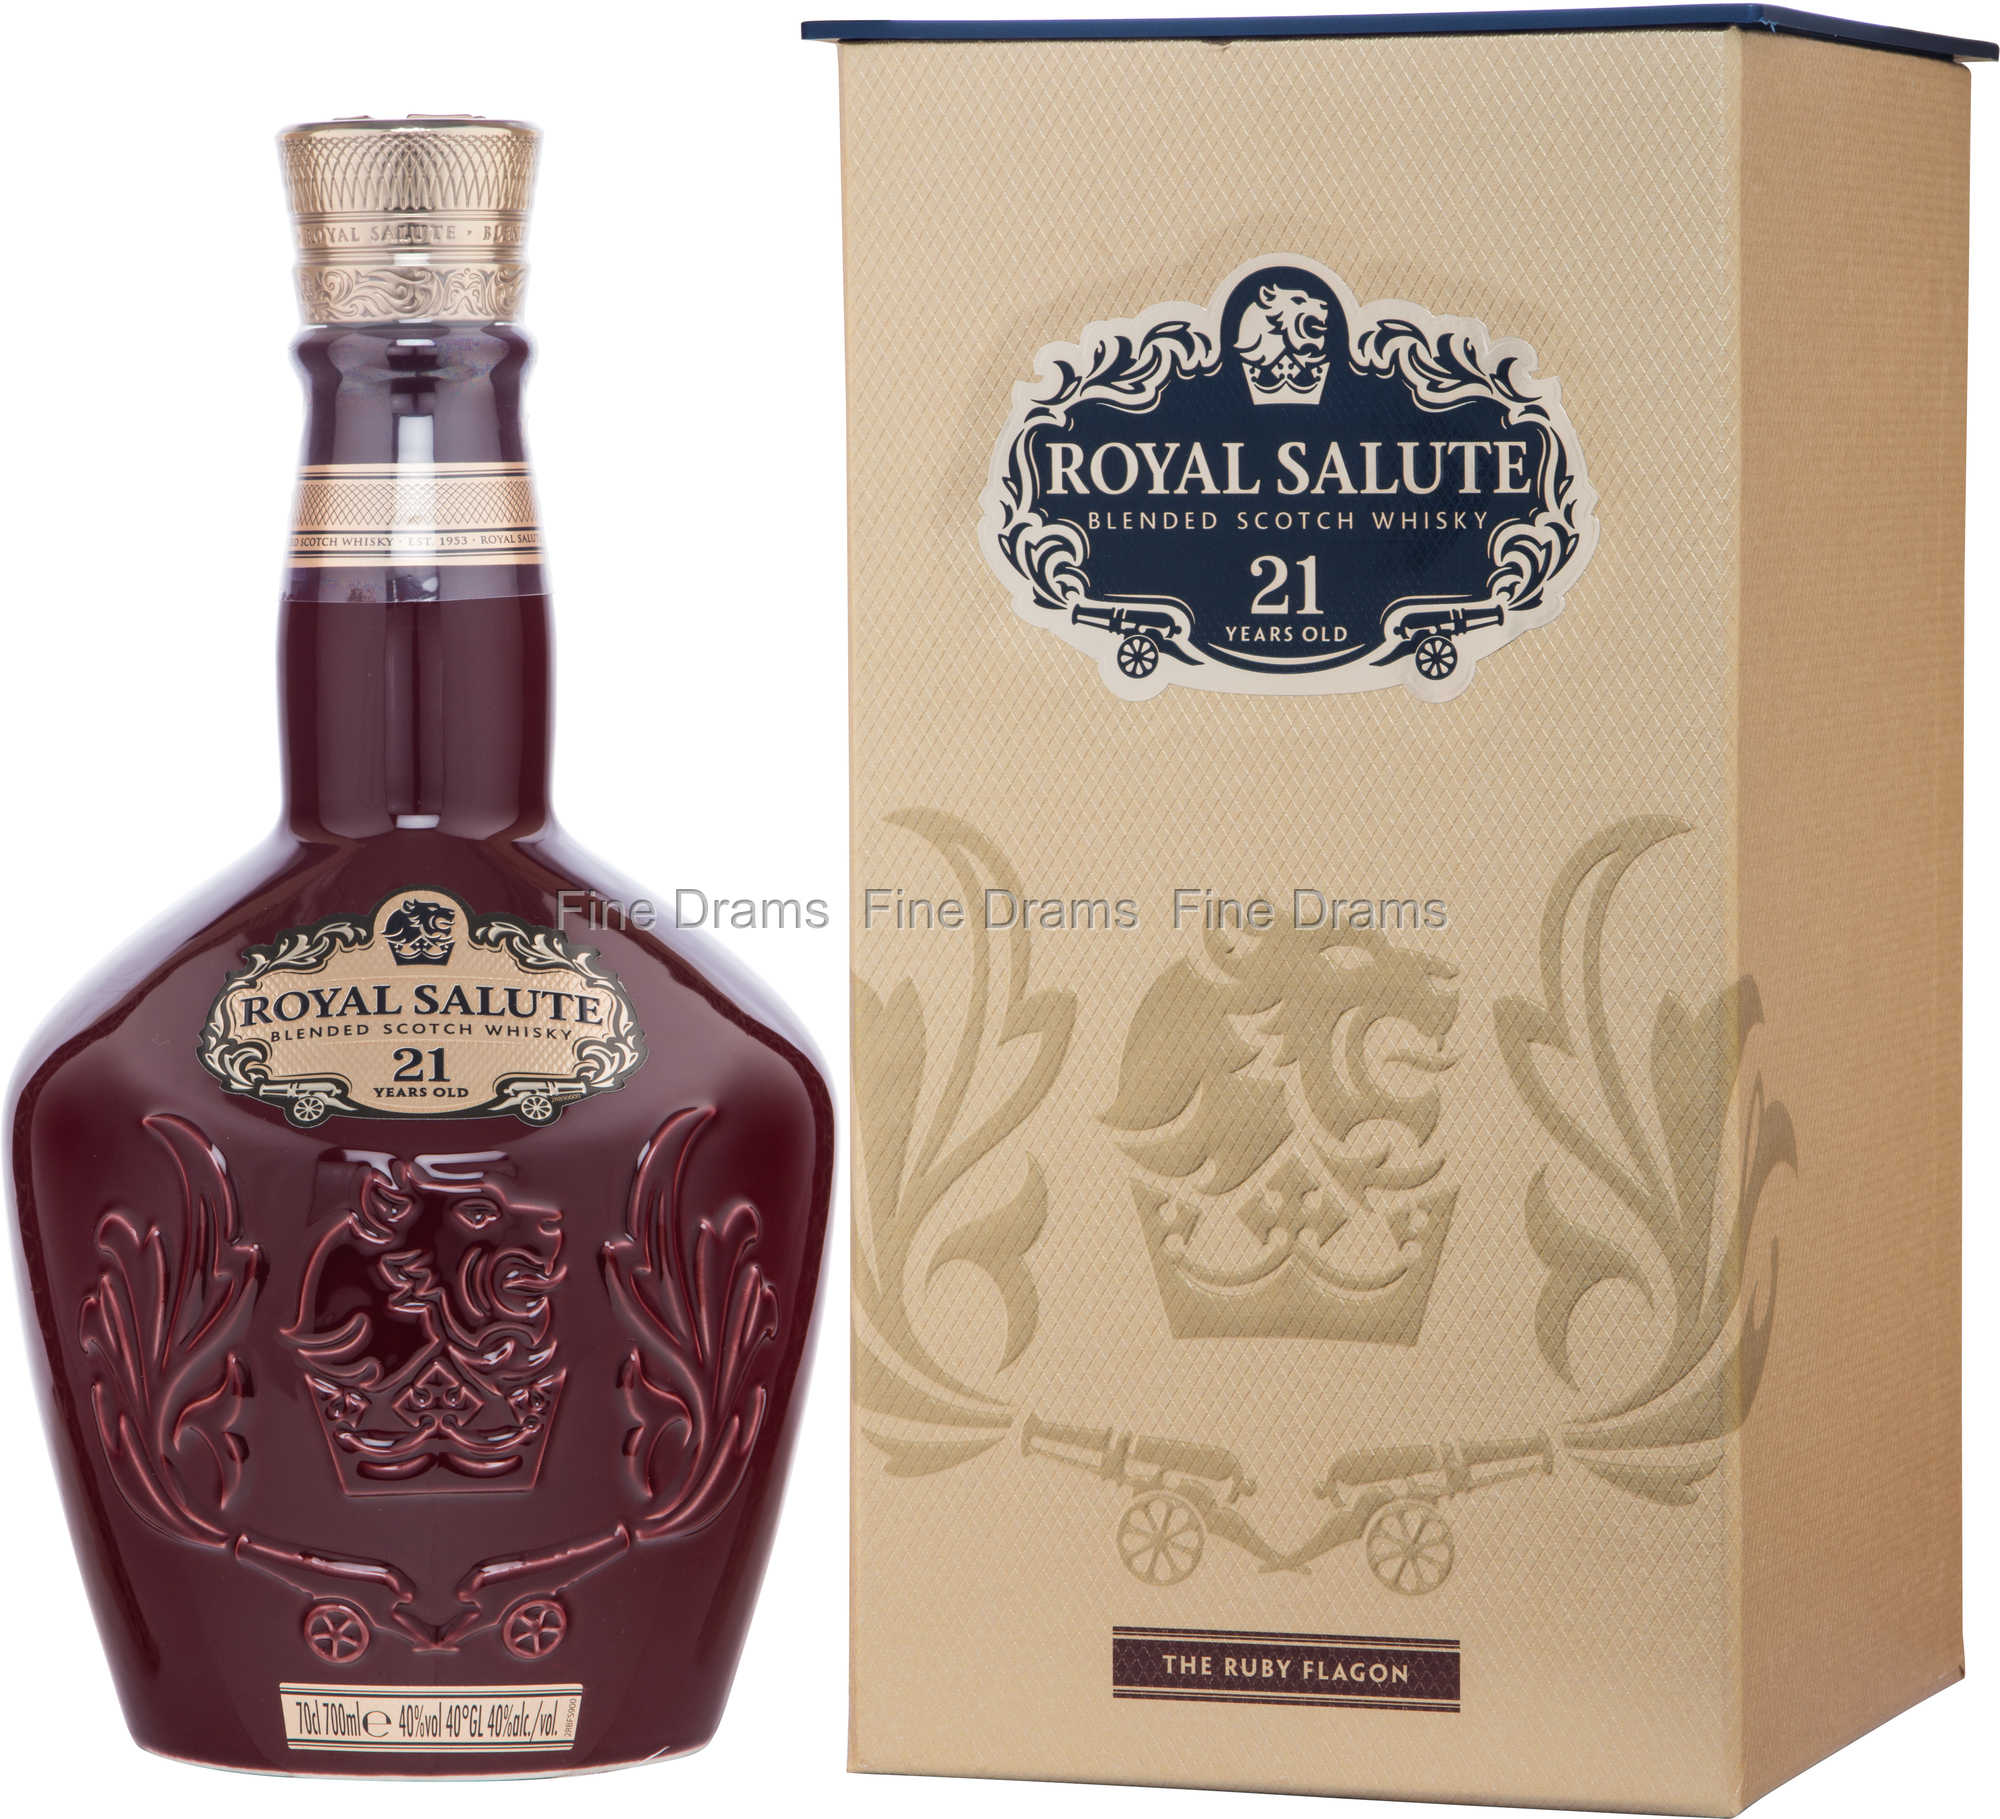 Chivas Royal Salute 21 Year Old Whisky - The Ruby Flagon